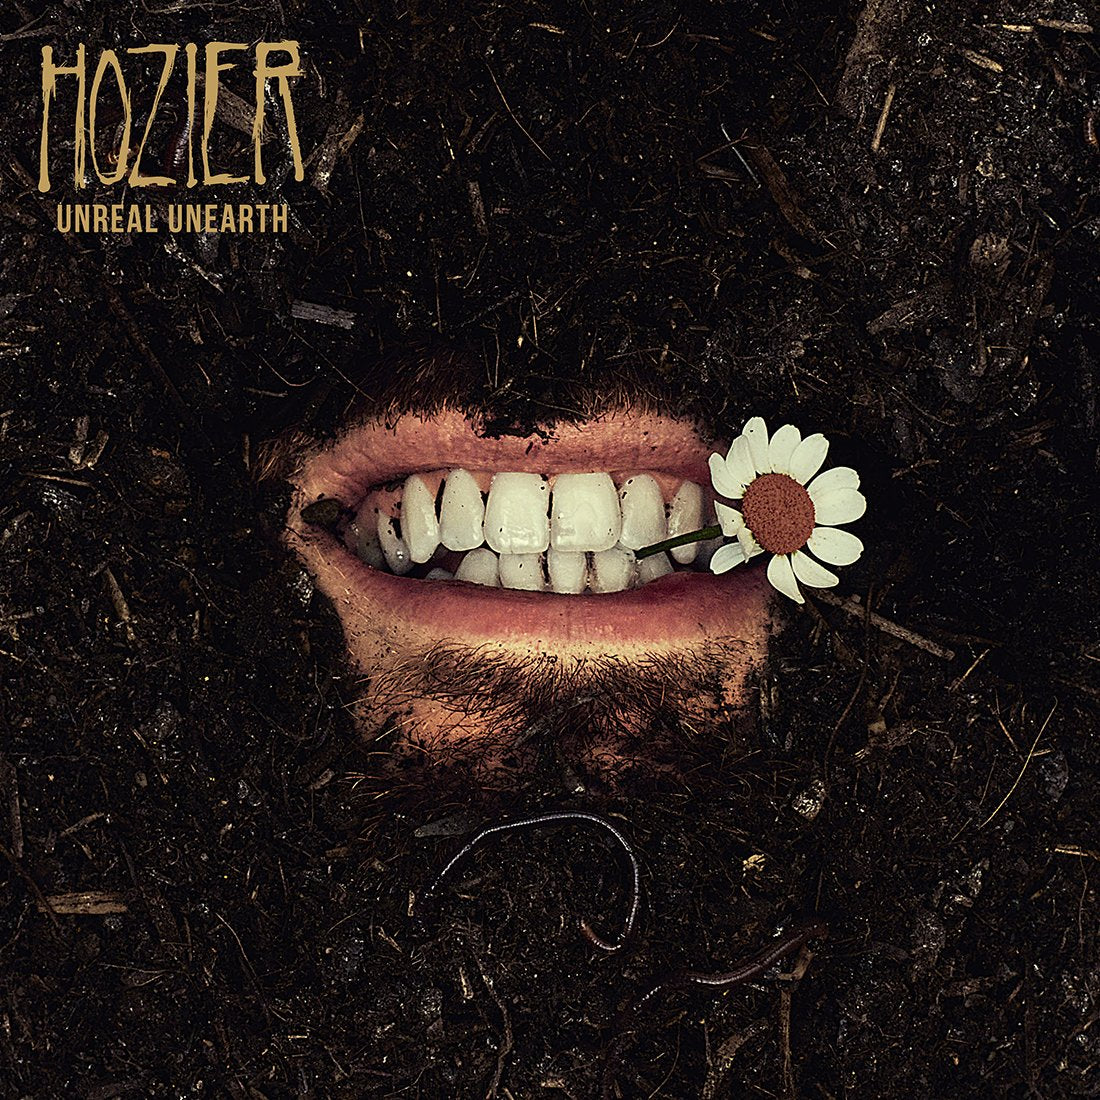 Hozier - Unreal Unearth: Unsigned Art Print